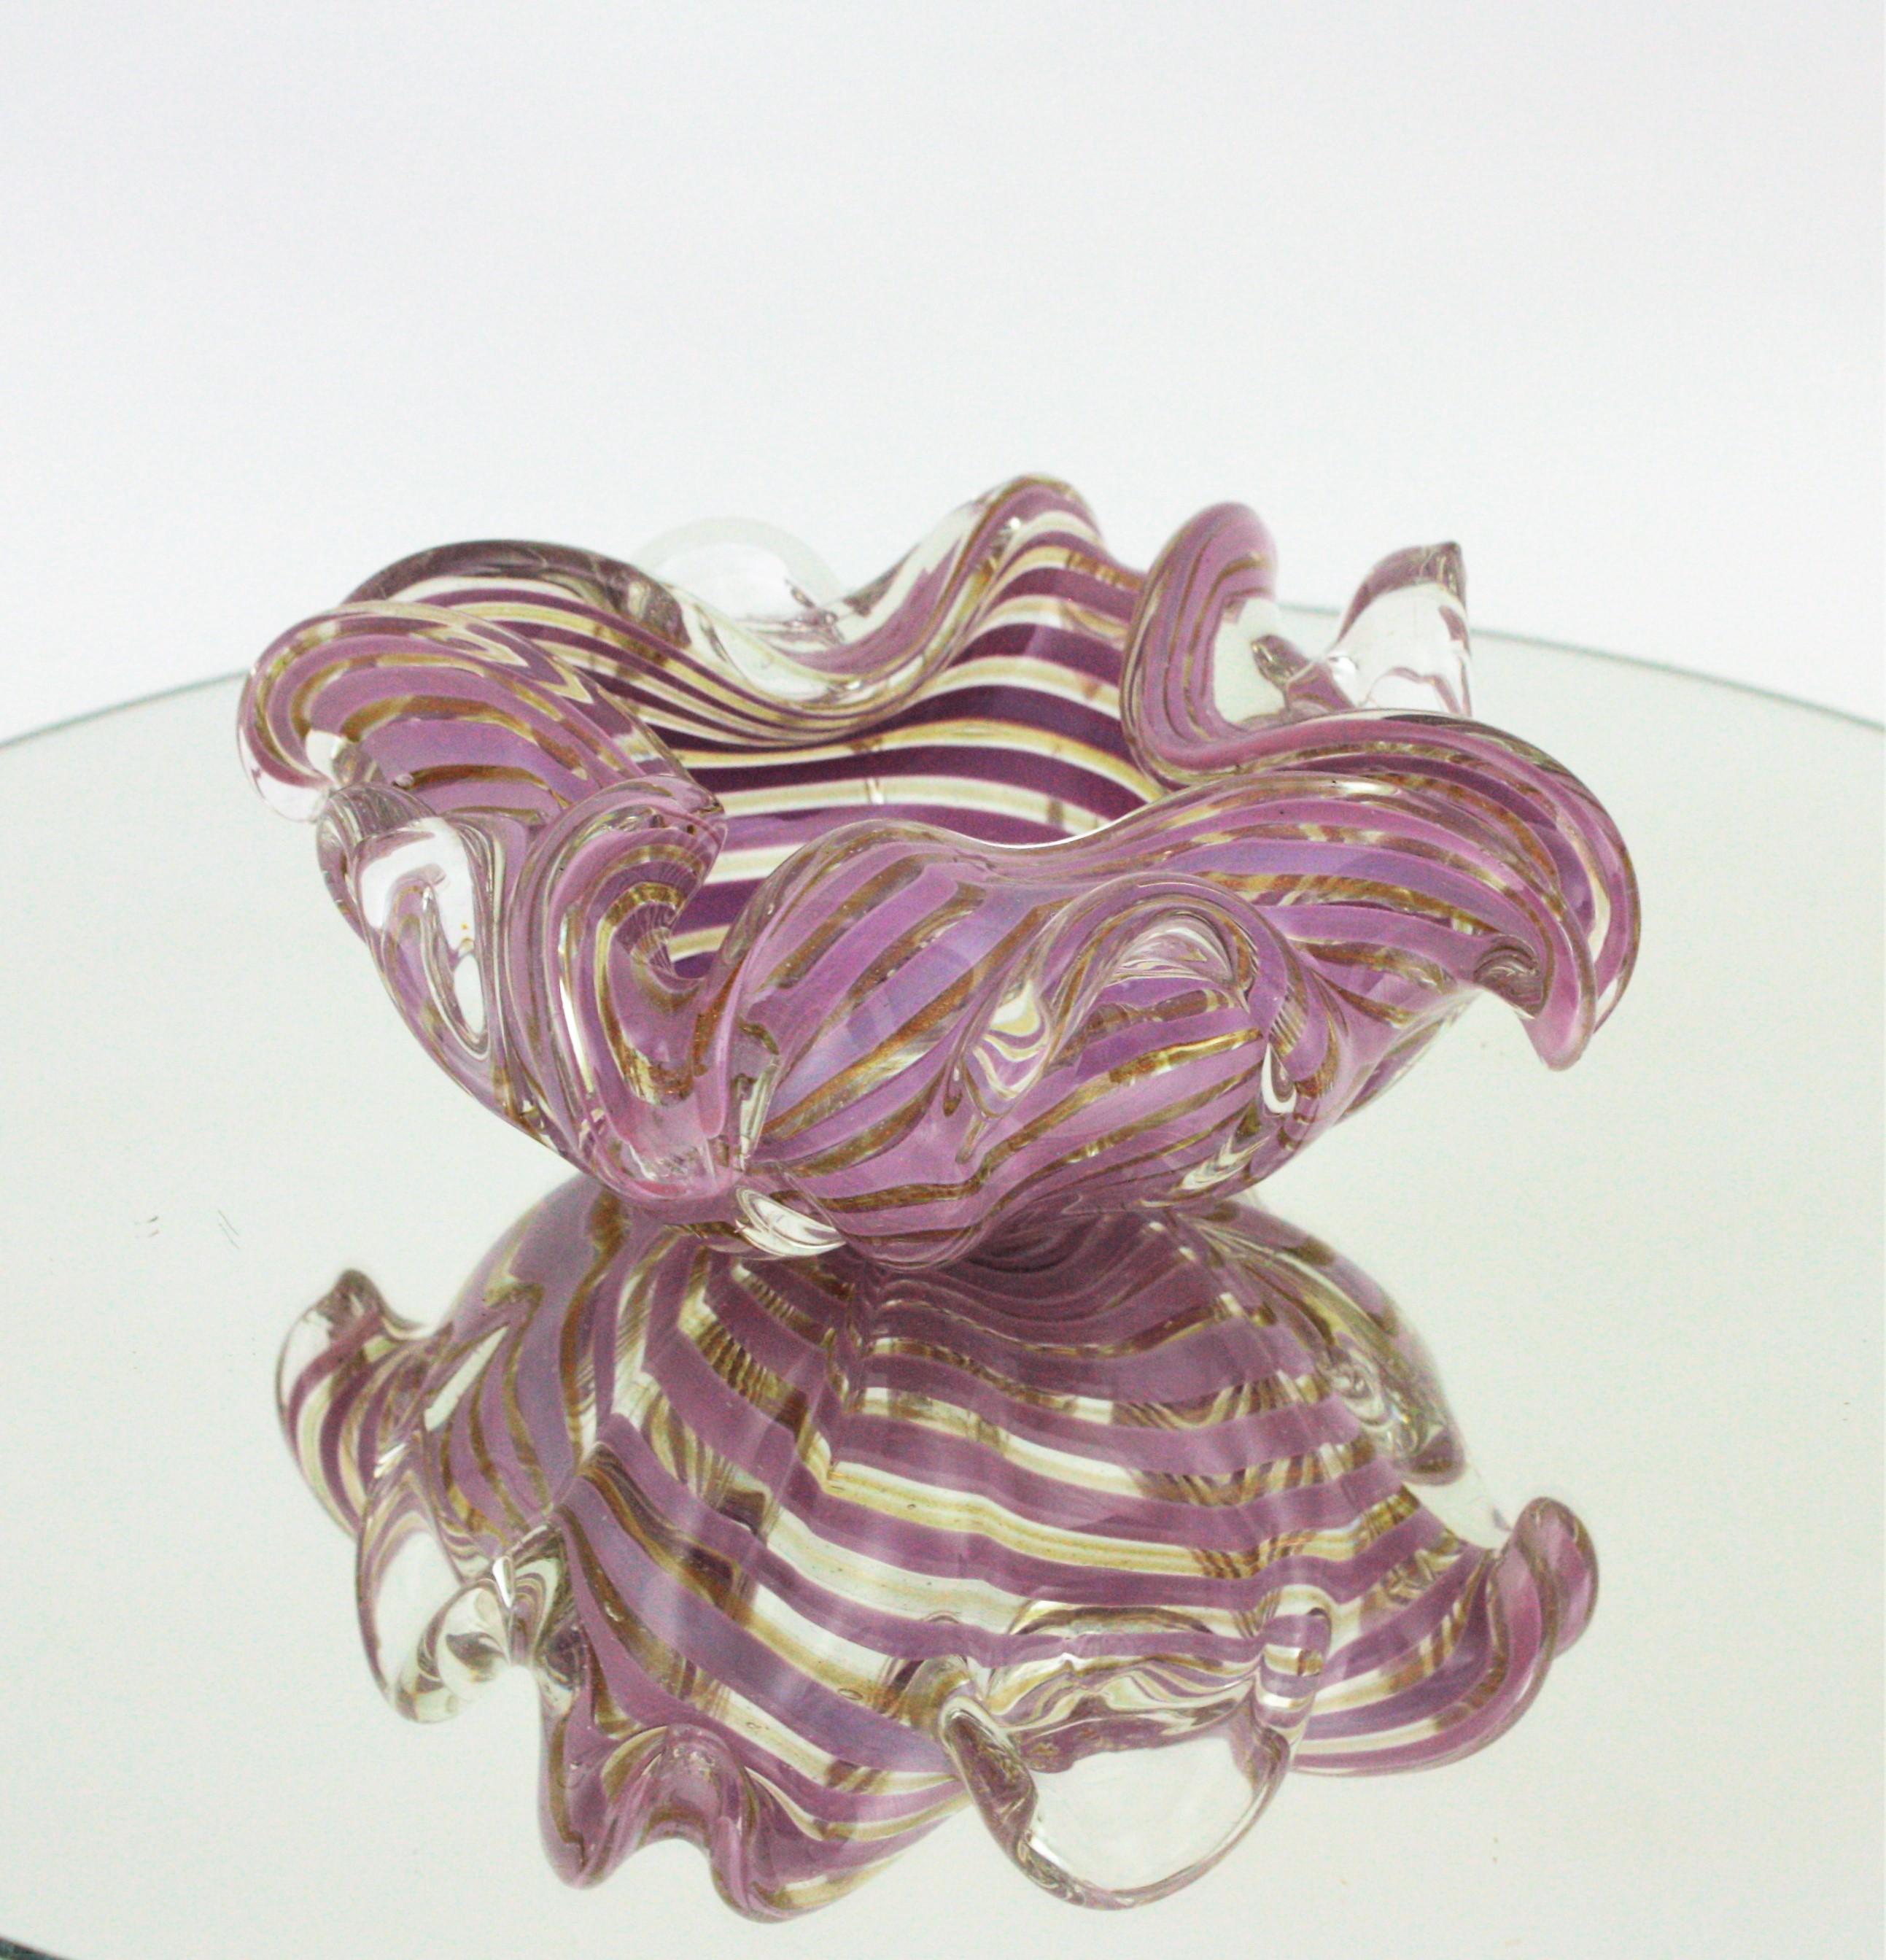 Verre Fratelli Toso Murano Glass Lilac Swirl Ribbons & Gold Dust Large Bowl / Ashtray en vente